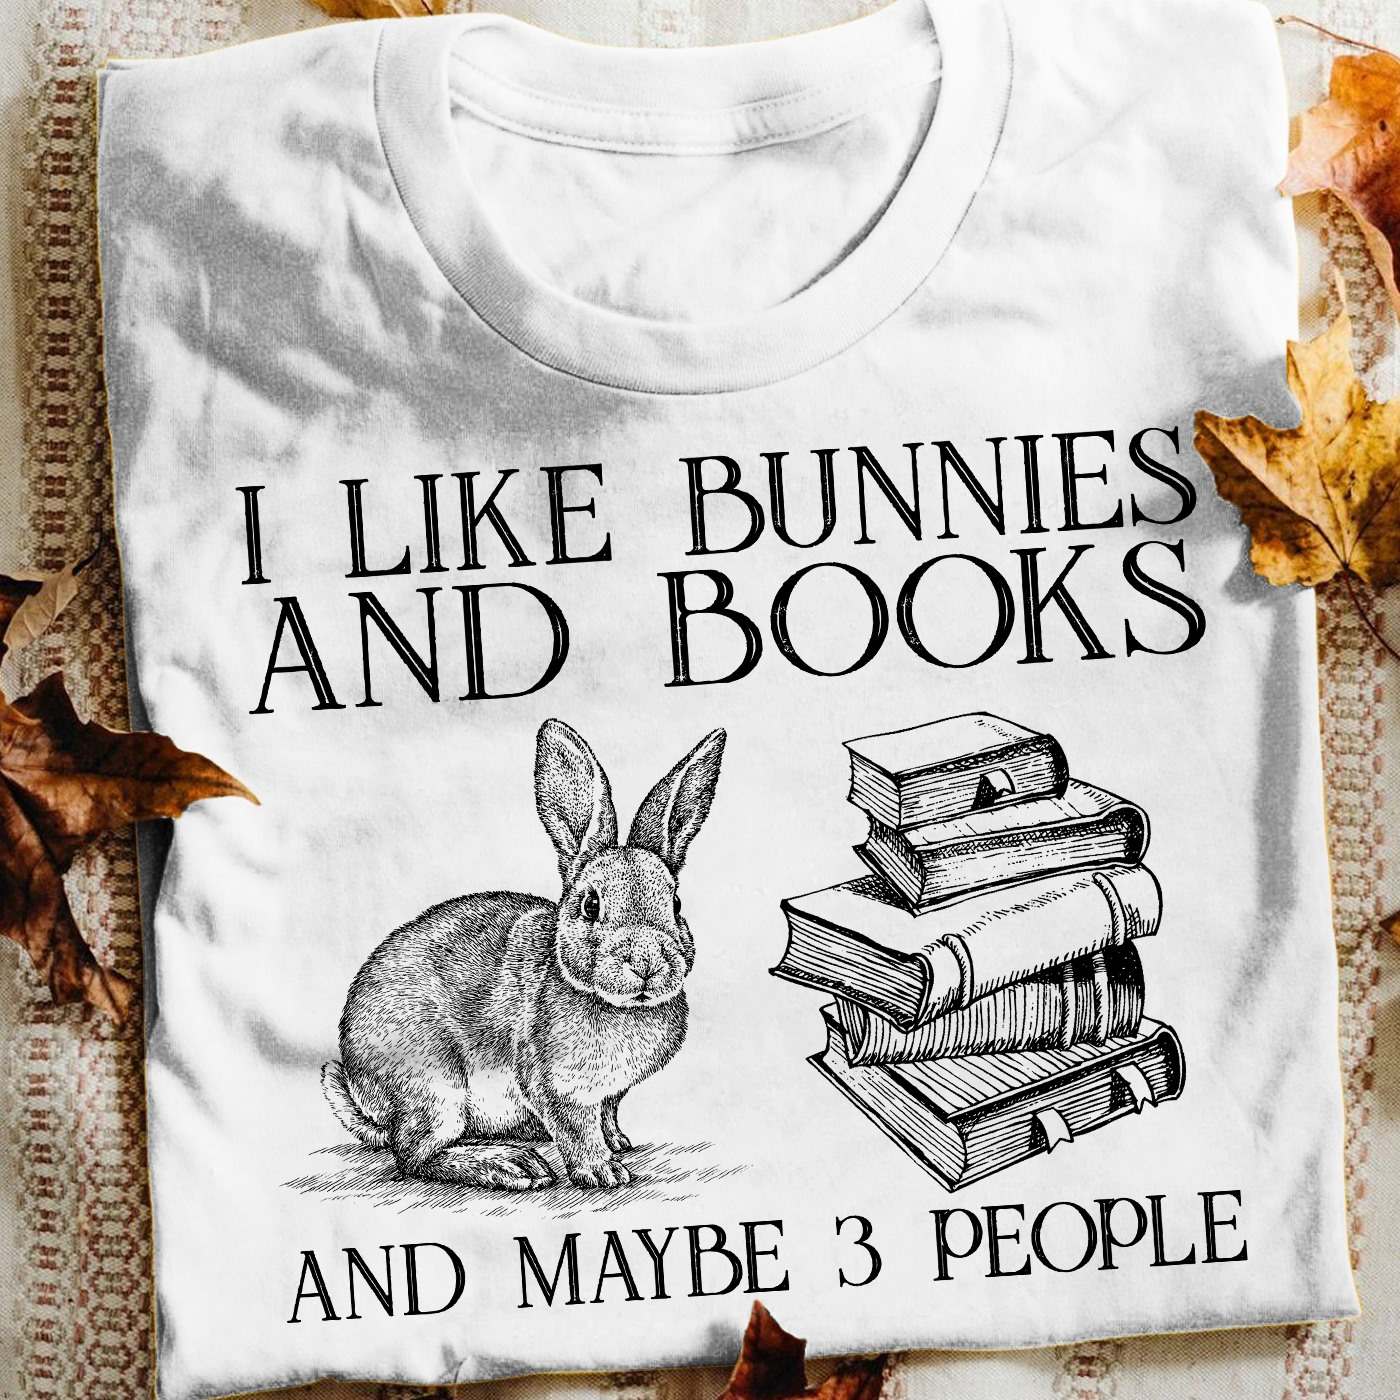 I like bunnies and books and maybe 3 people - Book lover